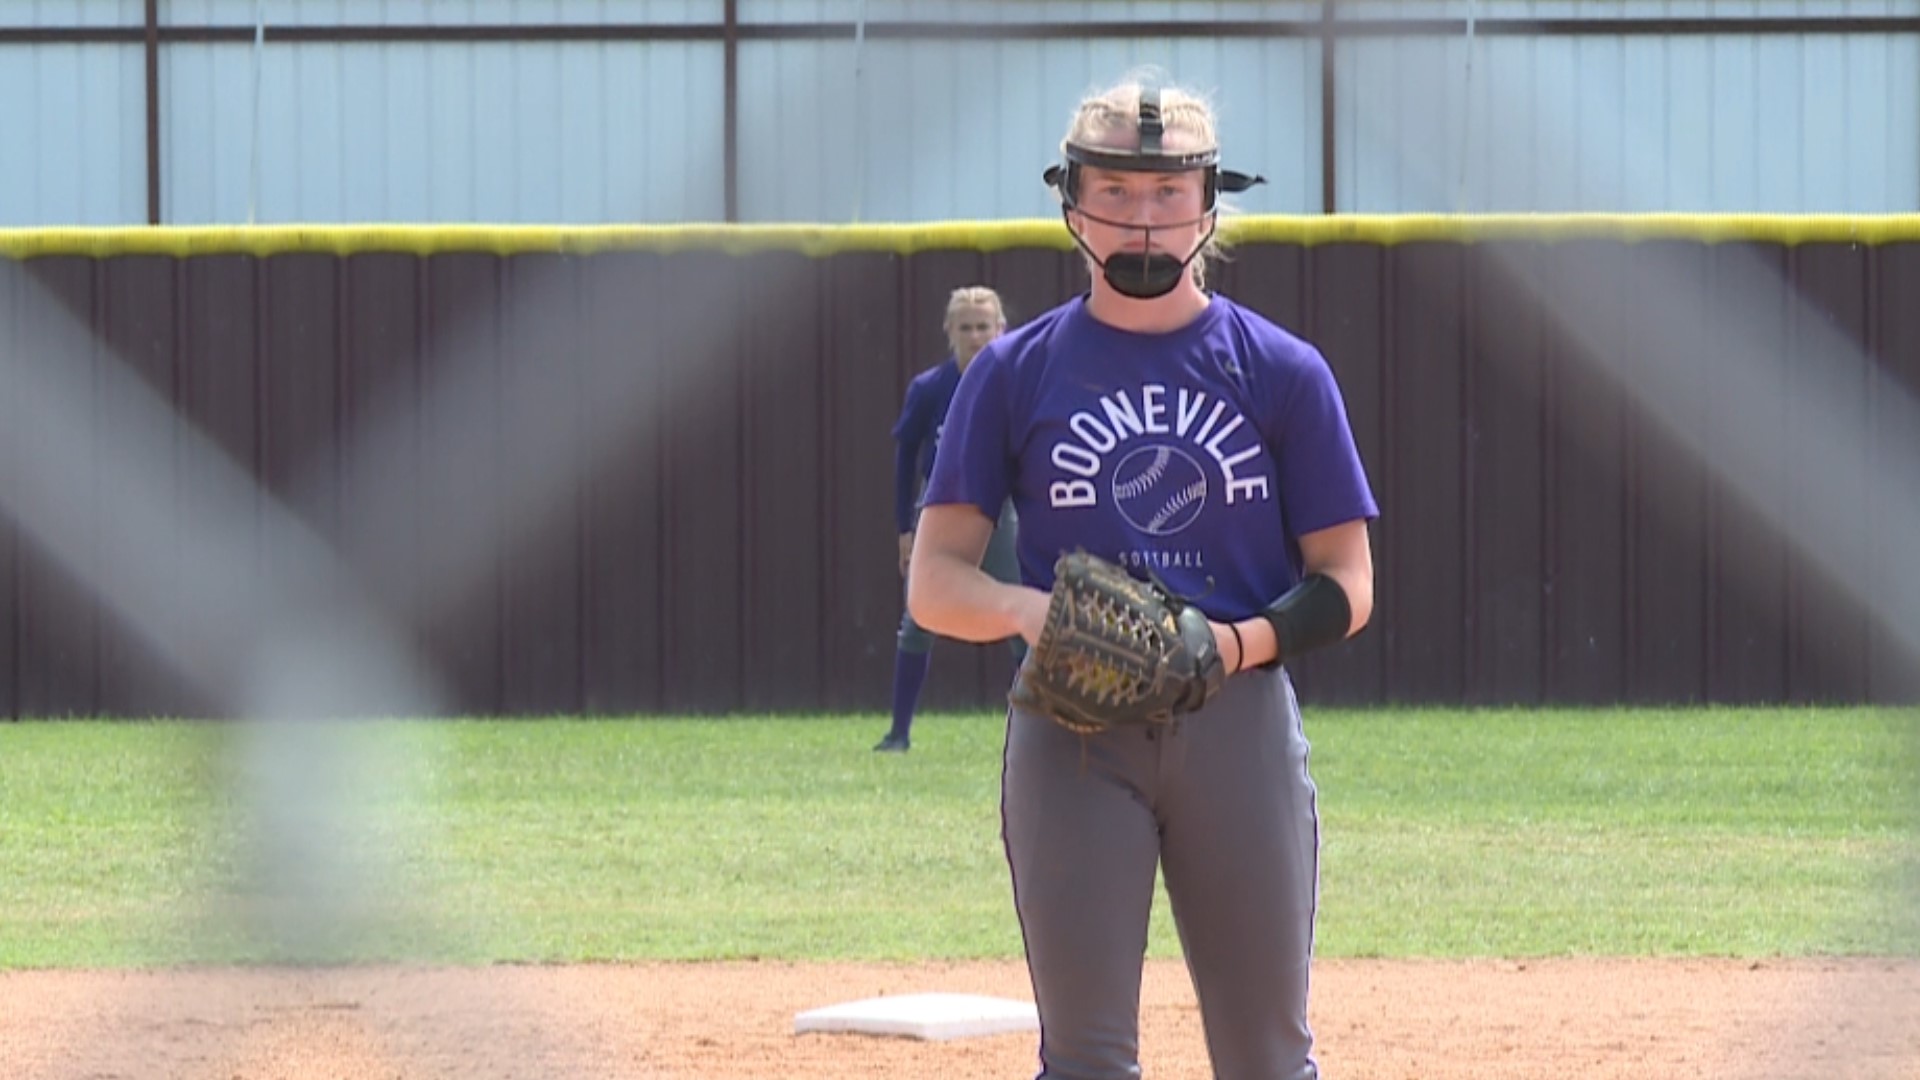 Junior pitcher Lexi Franklin has the Lady Cats on the cusp of their first state championship since 2004.